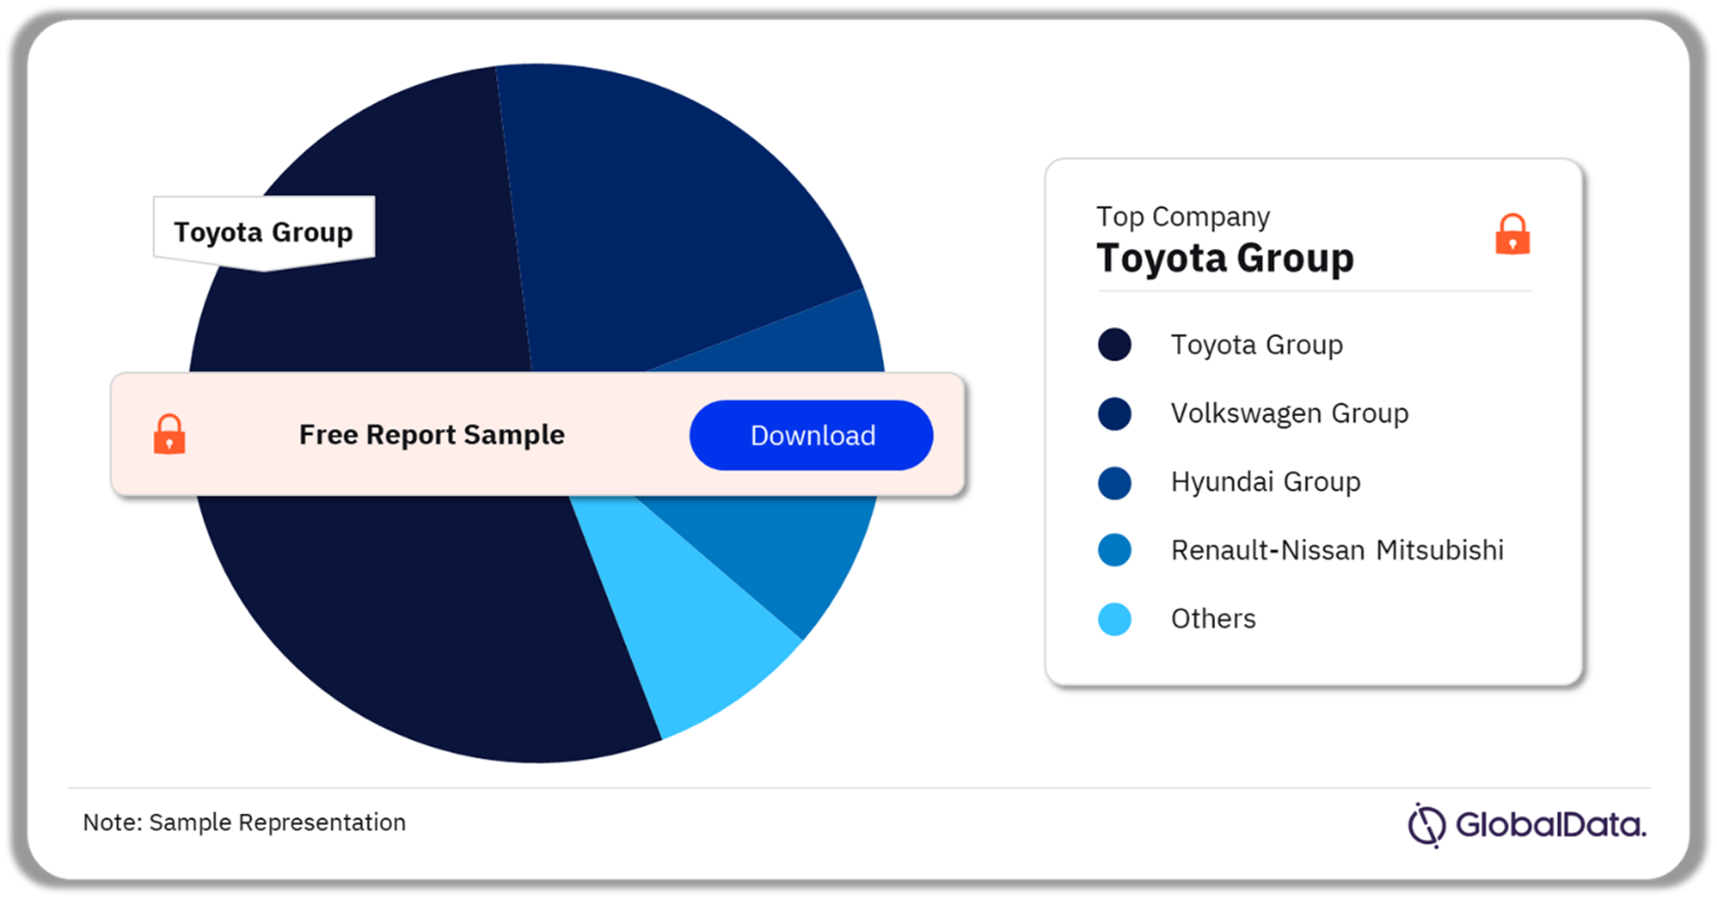 Automotive Electrified Vehicles Market Analysis by Companies, 2021 (%)